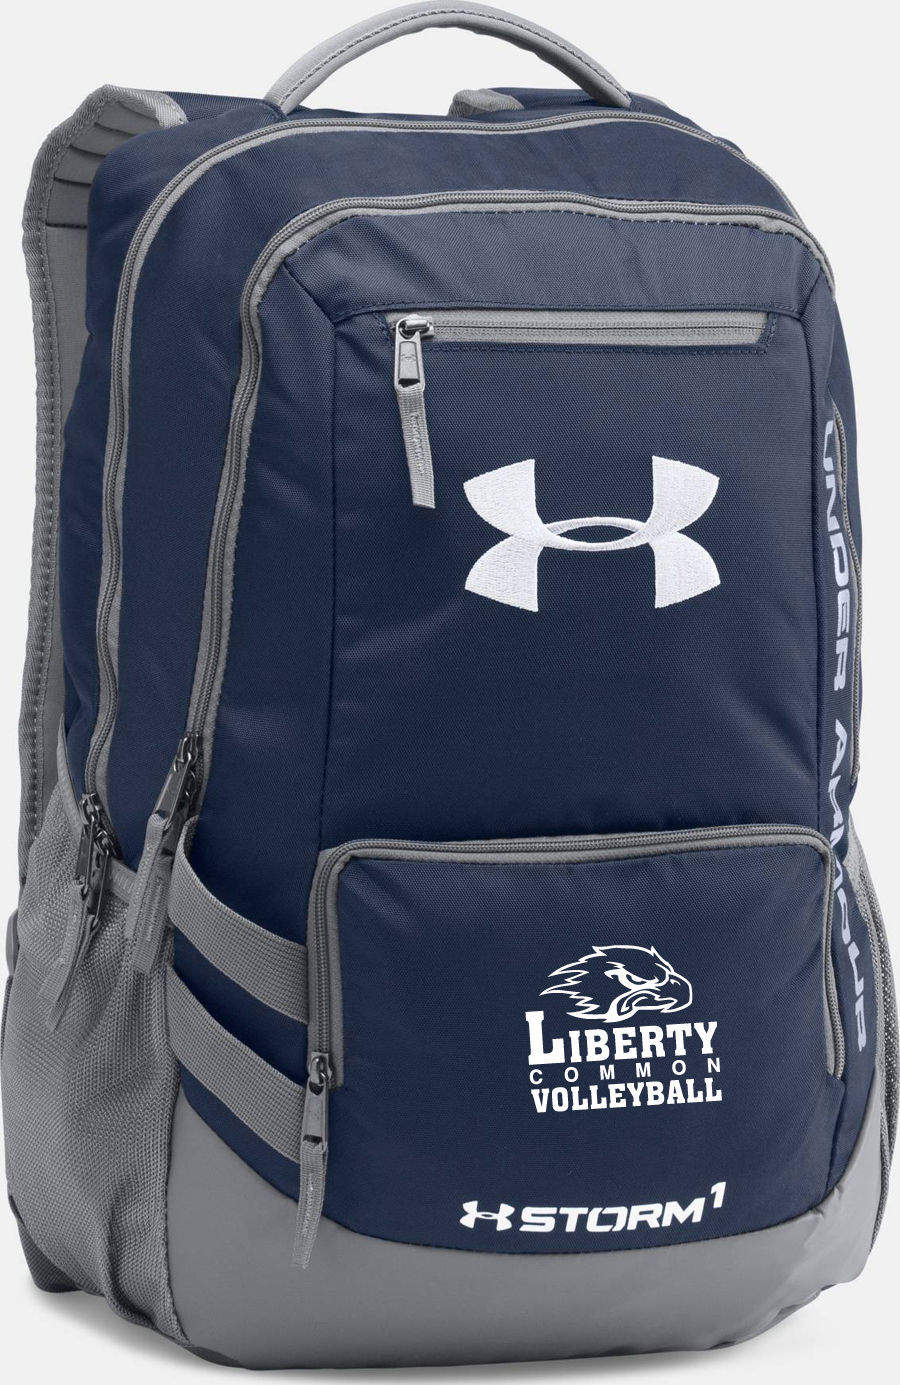 under armour navy blue backpack